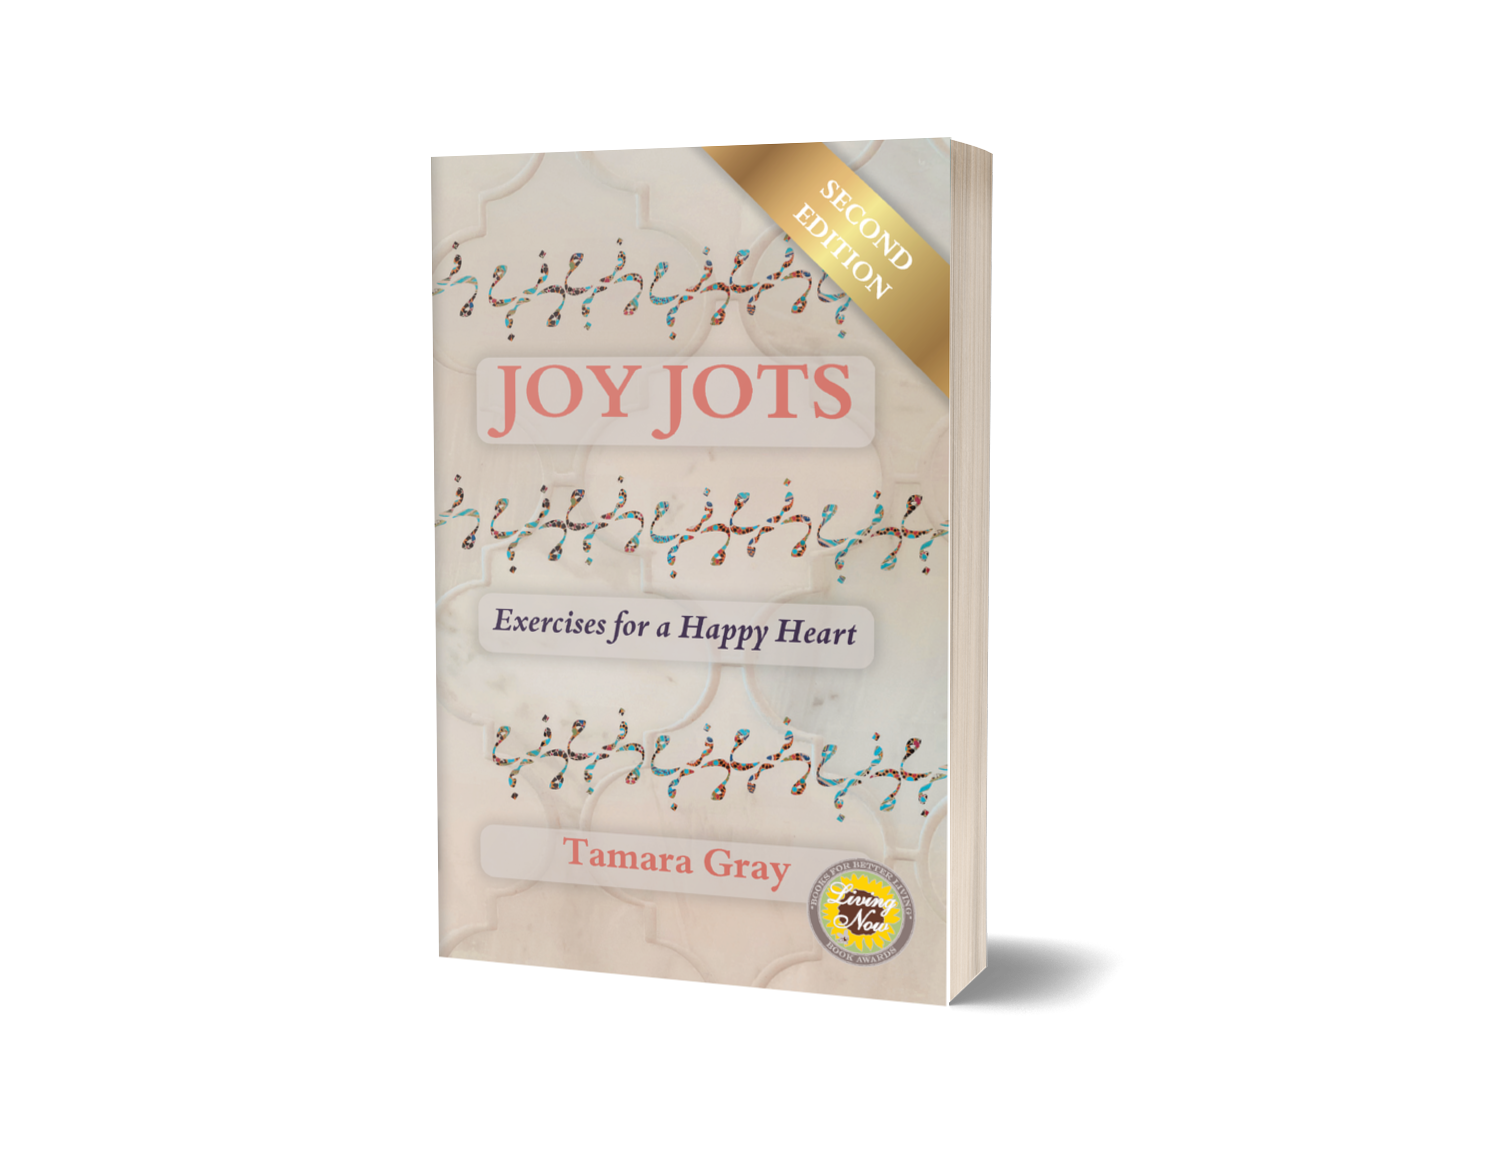 Joy Jots Exercises for a Happy Heart (Second Edition) book